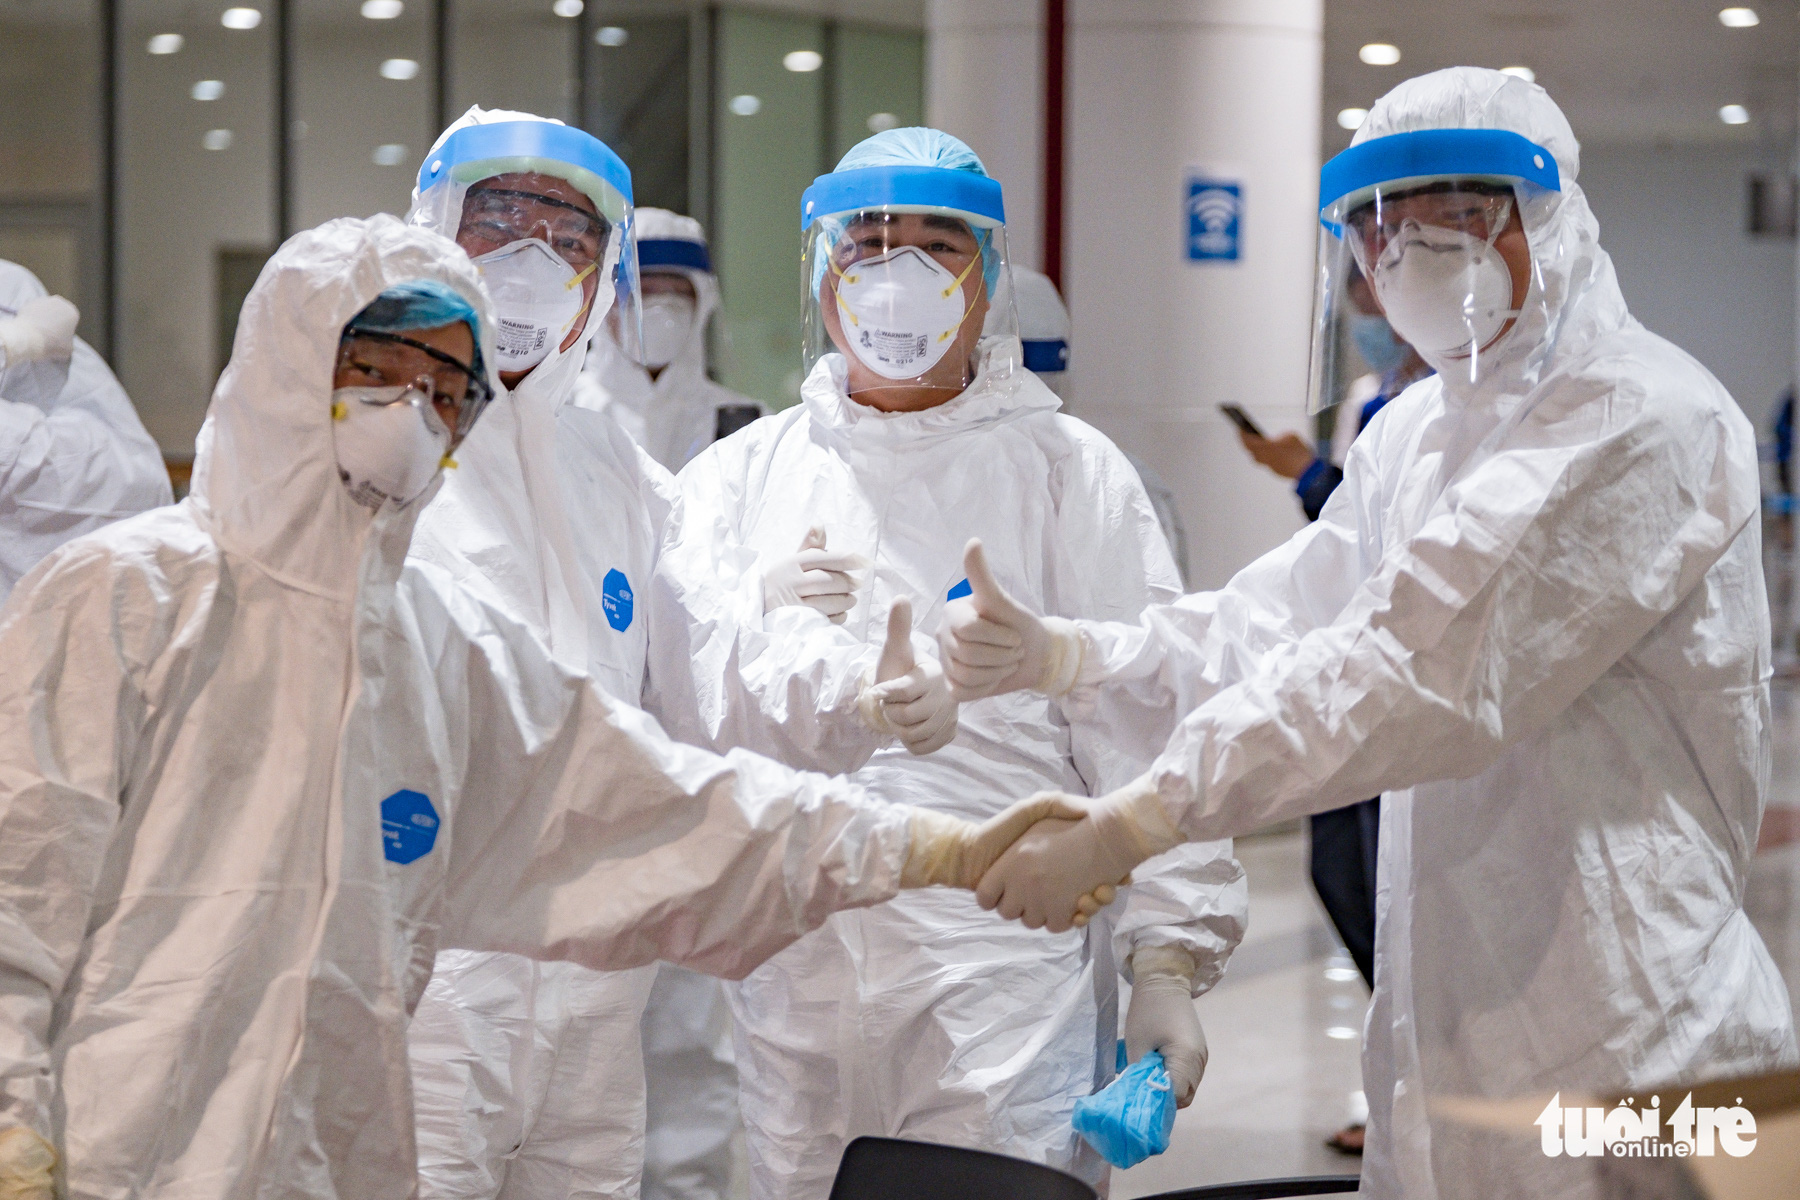 Health workers wears protective suit and gears while performing duty at Noi Bai International Airport in Hanoi, Vietnam, March 18, 2020. Photo: Nam Tran / Tuoi Tre